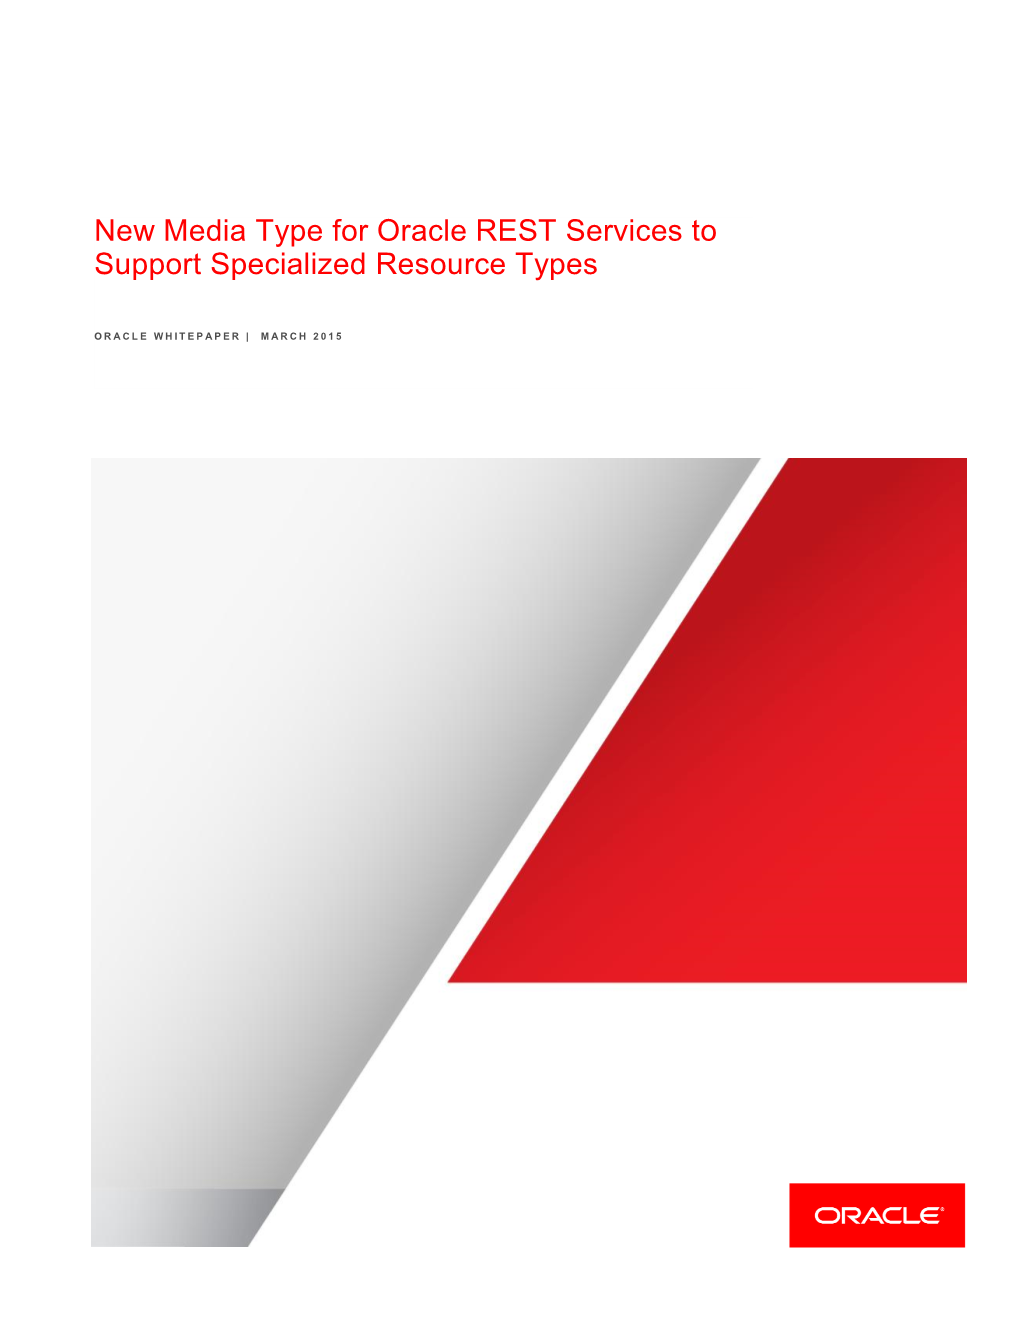 Media Type Application/Vnd.Oracle.Resource+Json